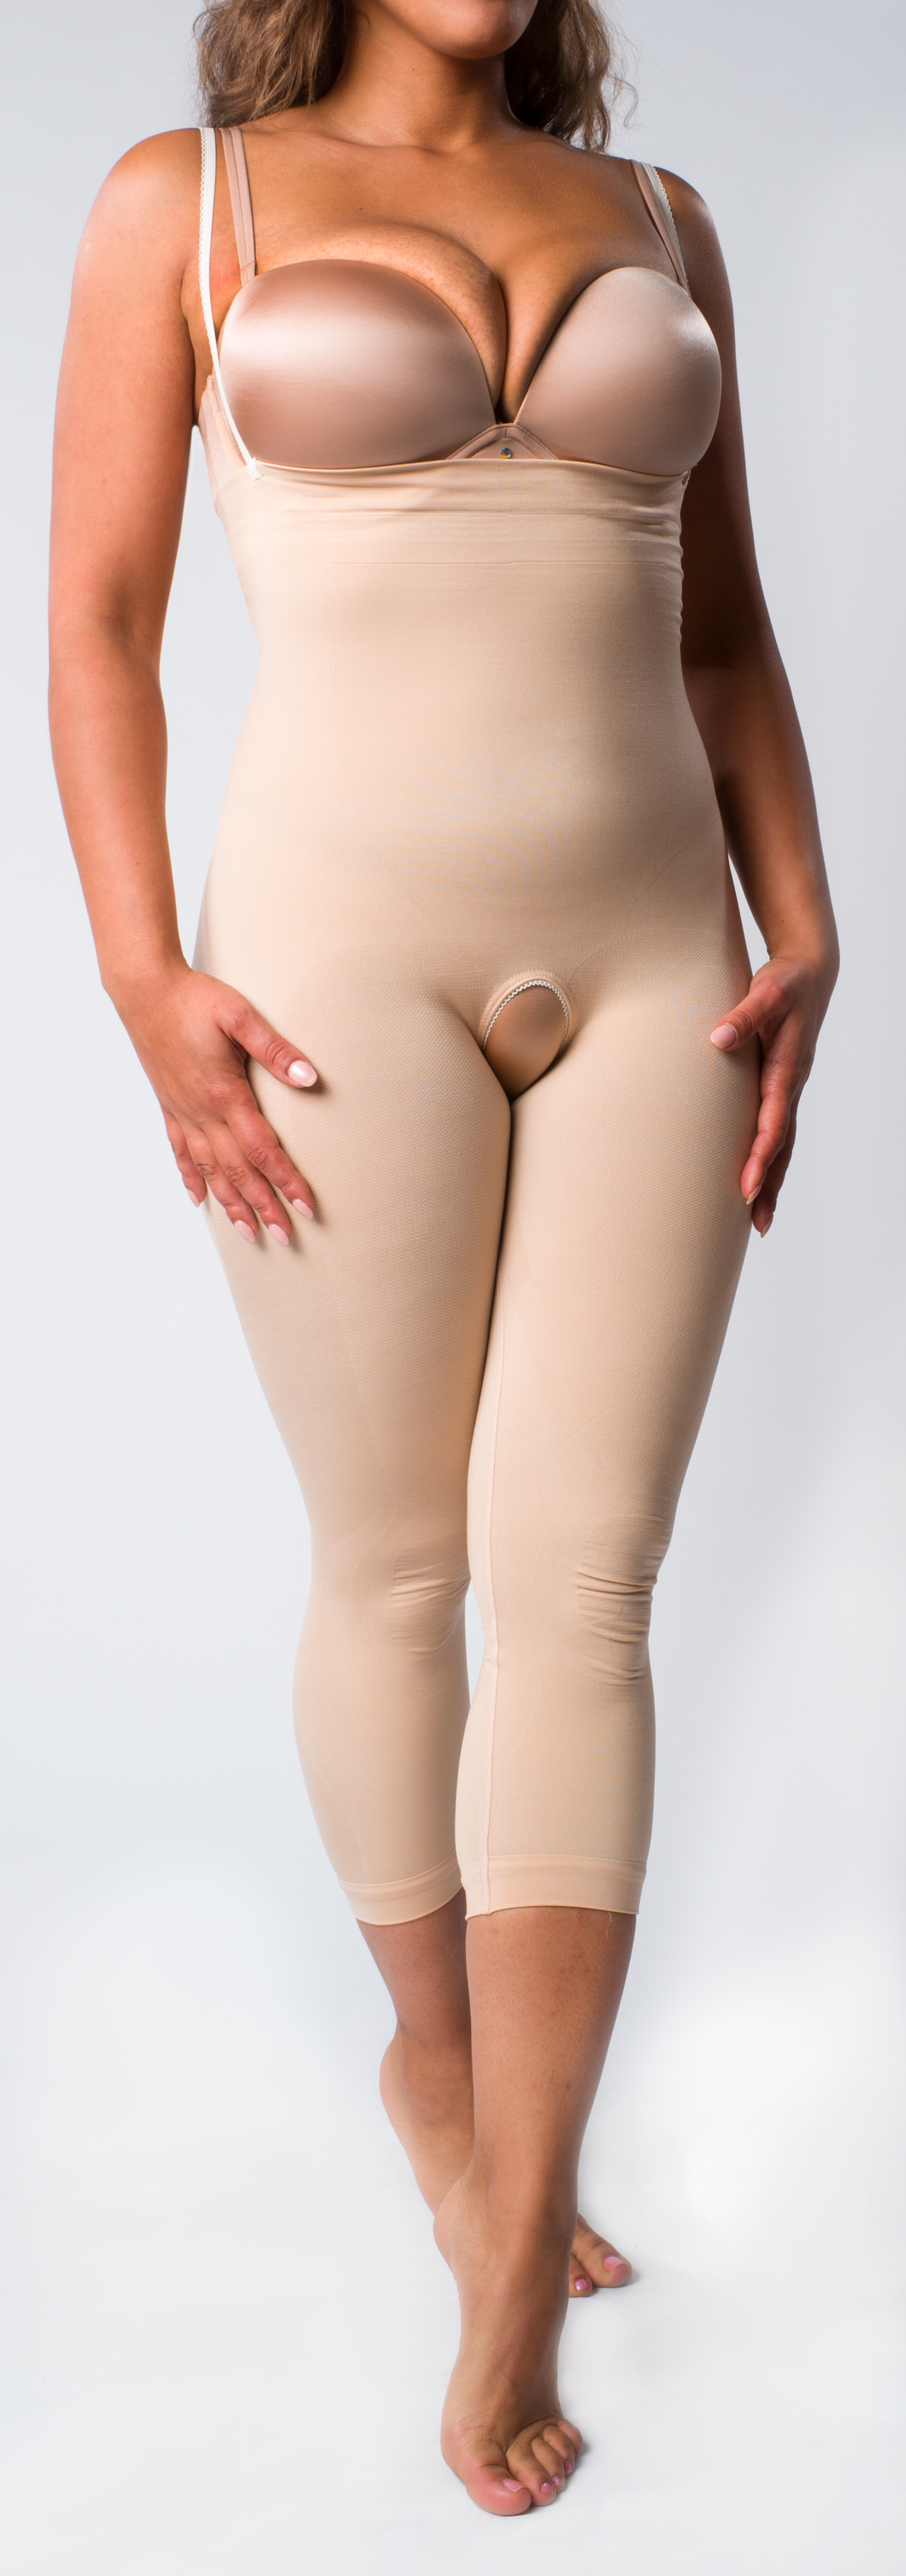 615 High Waist Compression Capri - Great for Layering With Bandages, Wraps  or Stockings